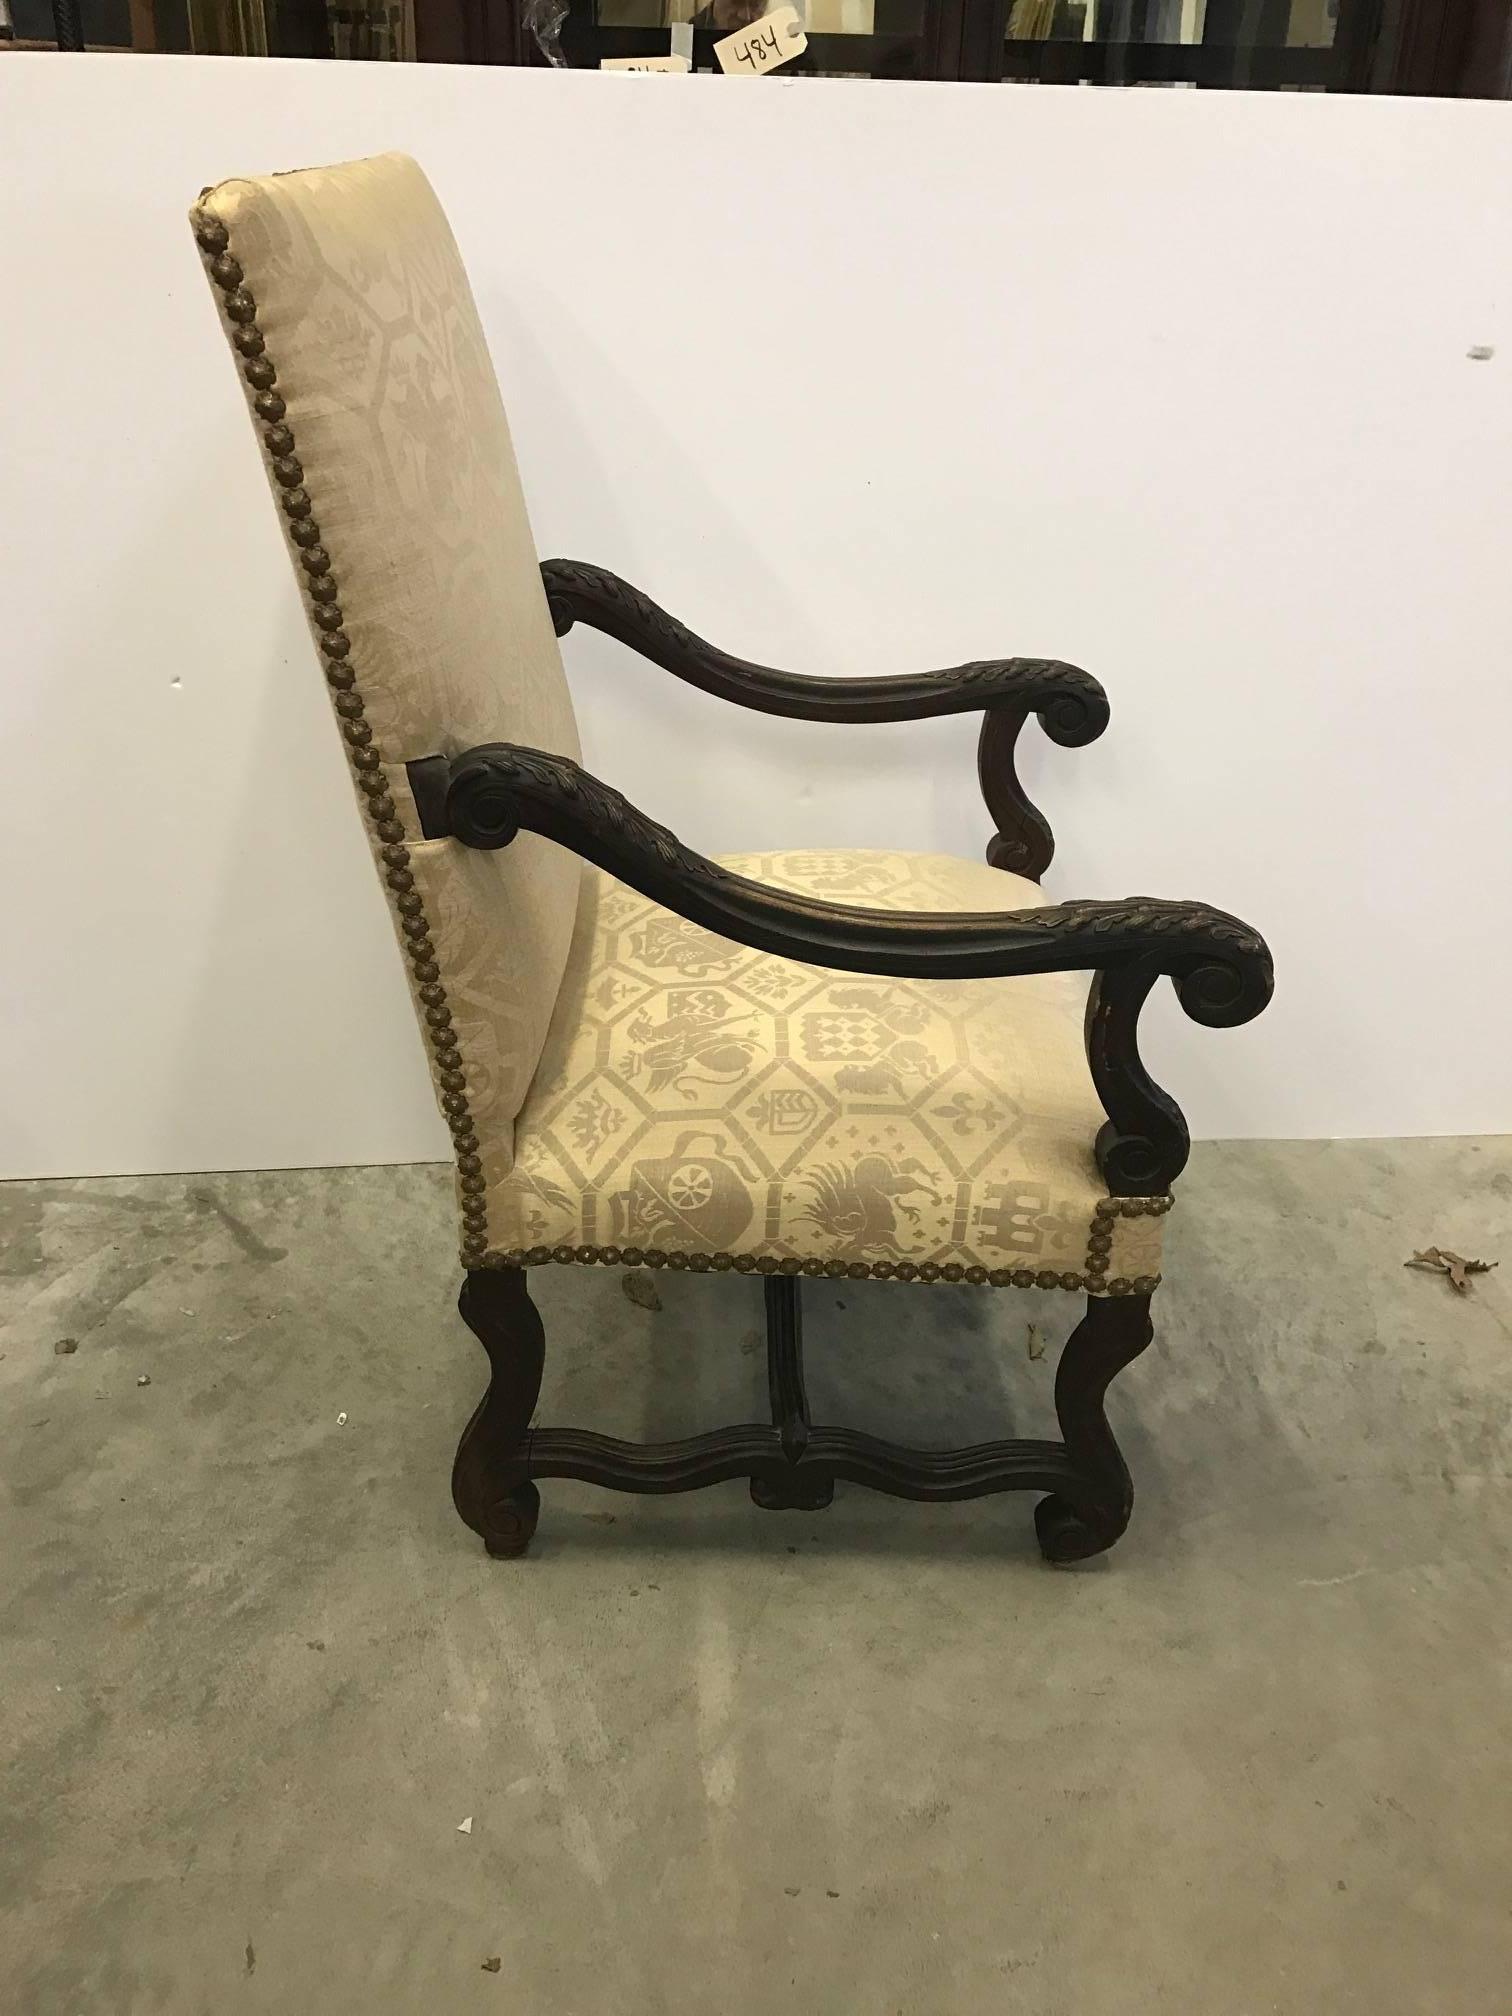 A 19th Century Hand carved English library chair. Long sloping arms with acanthus leaf carving. New soft yellow damask upholstery. Stately and handsome statement chair.